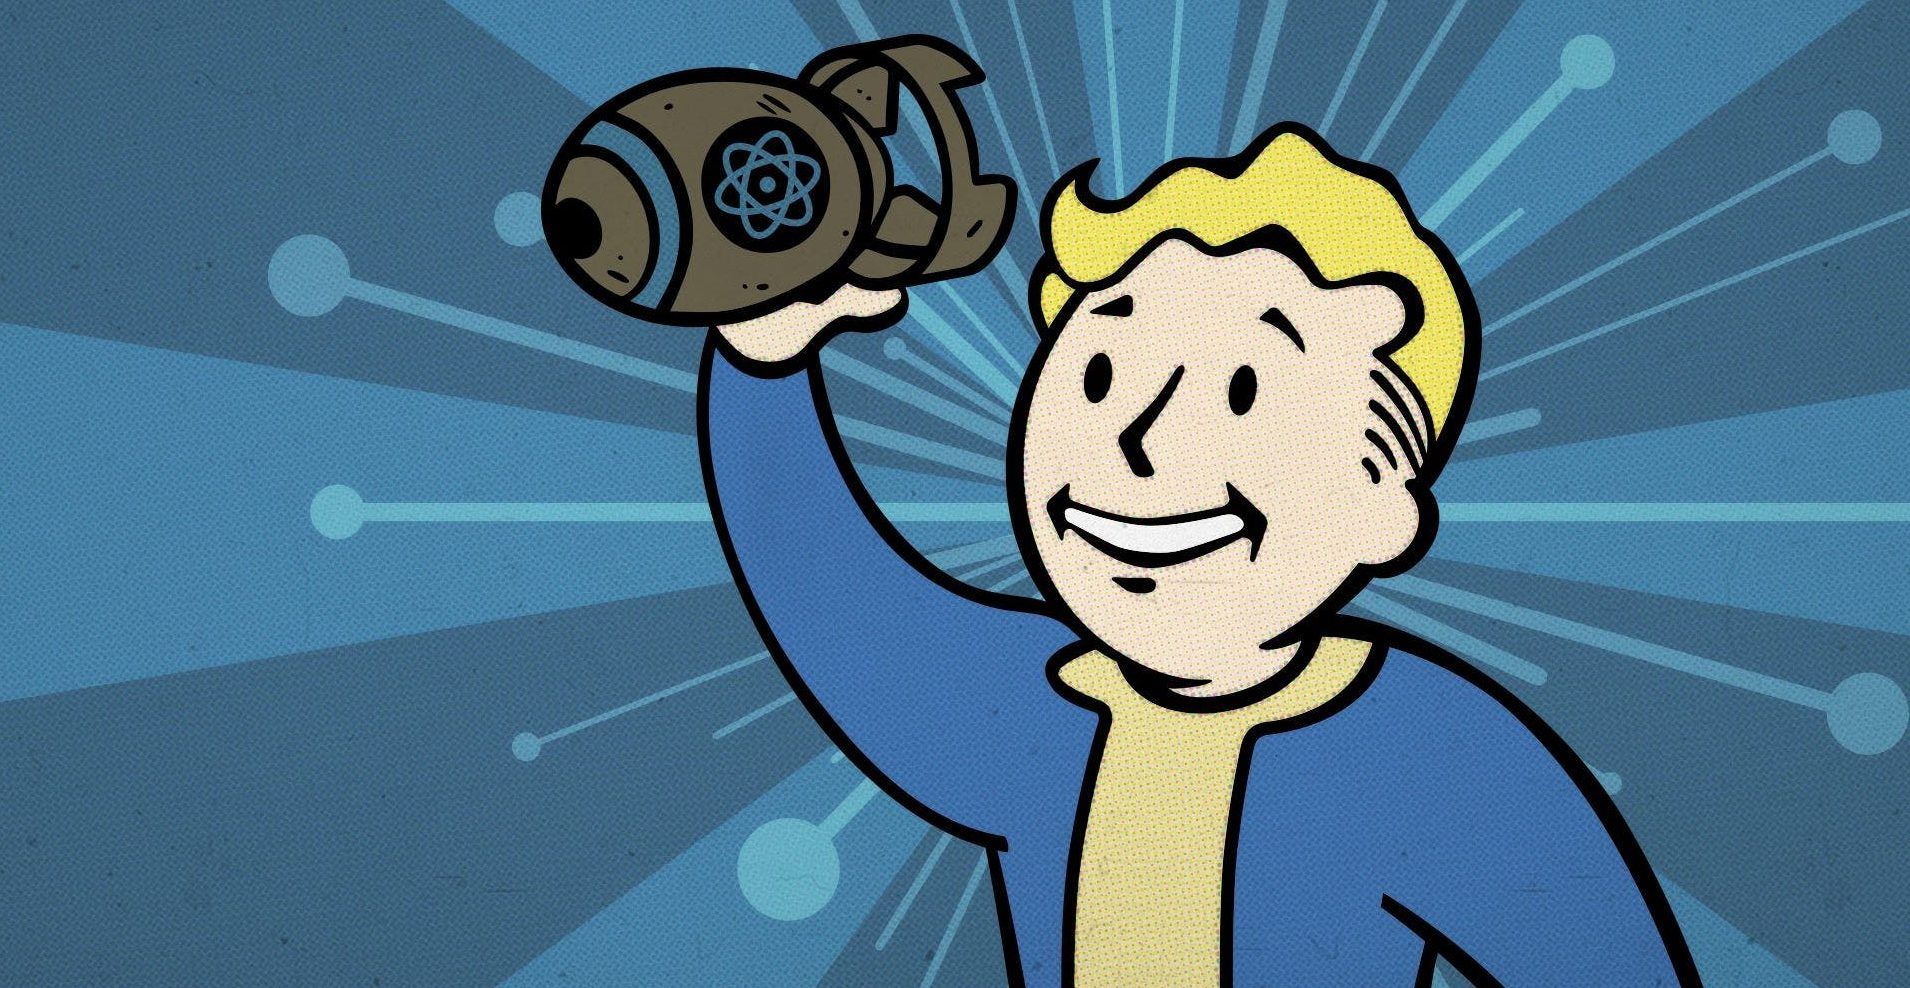 Fallout 76 Microtransactions Are About To Ramp Up